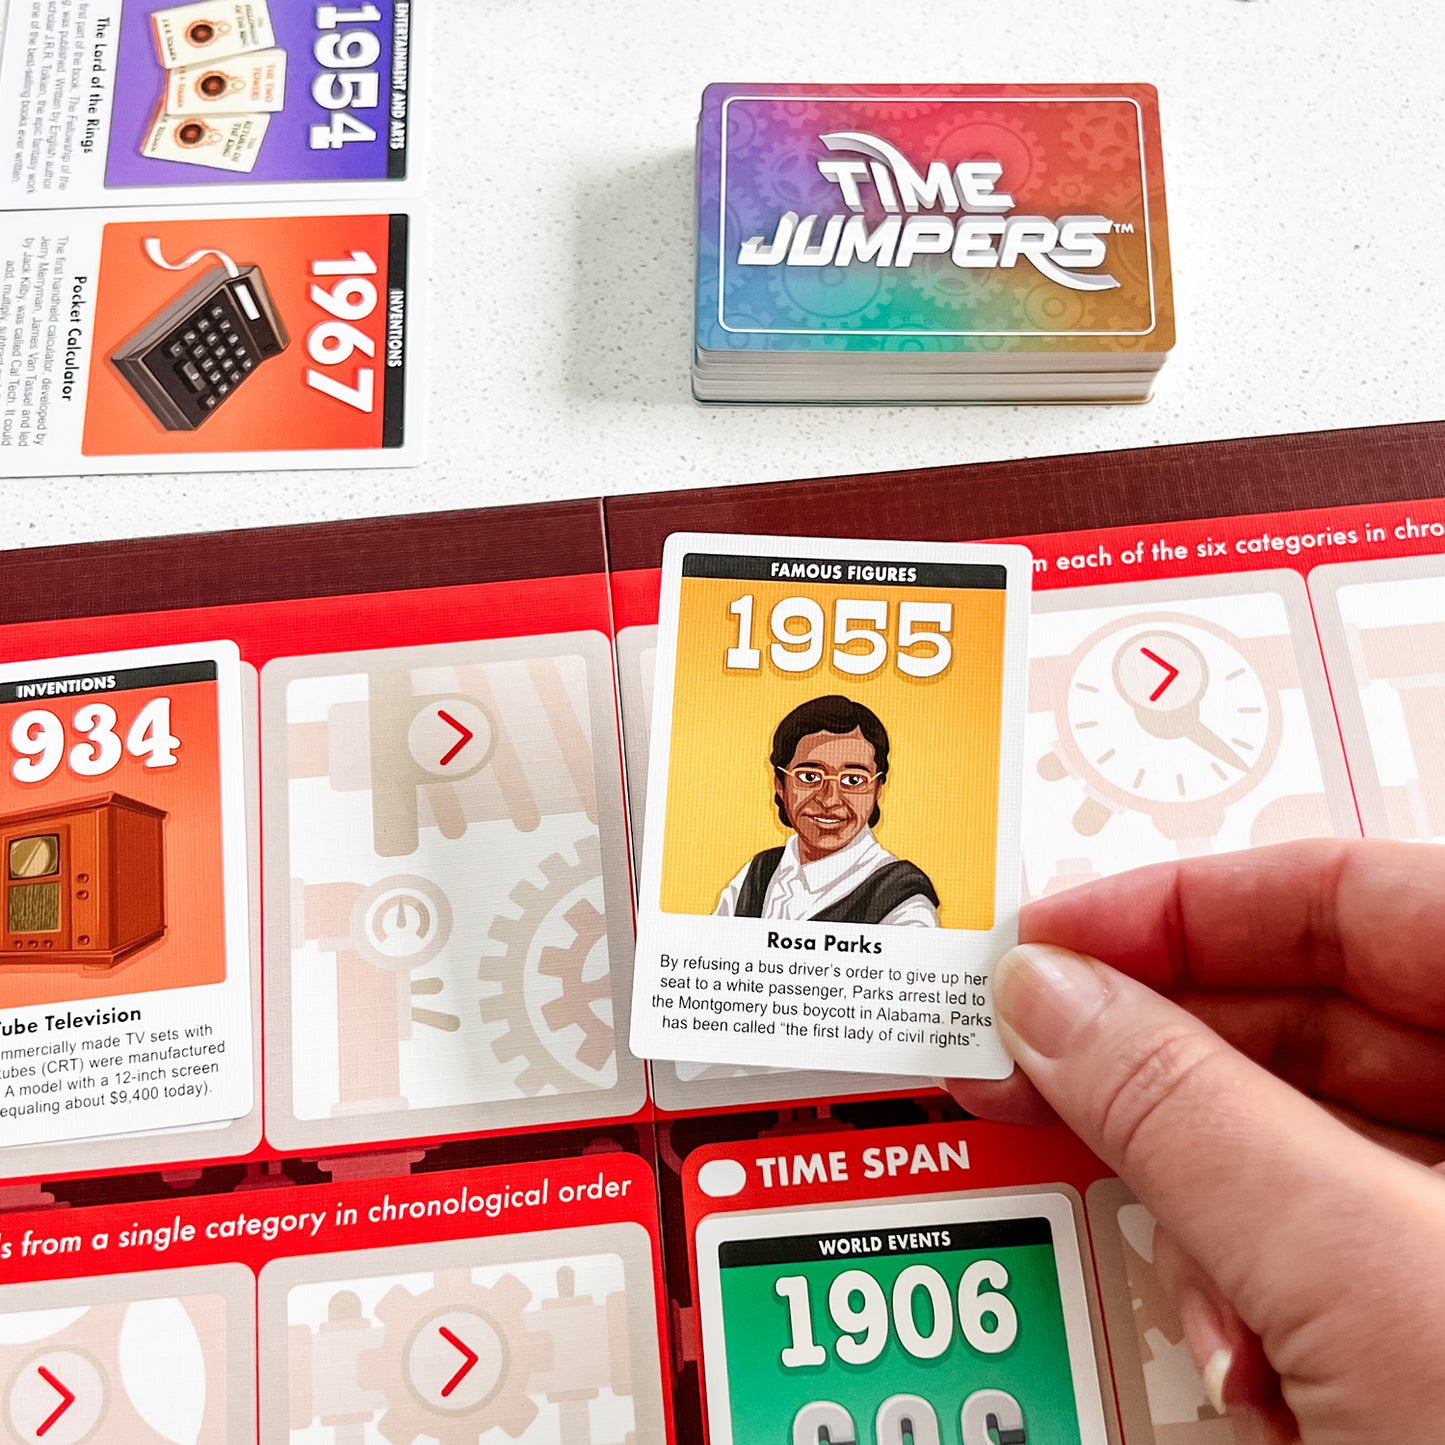 Learn about history and pop culture with SimplyFun’s game Time Jumpers.